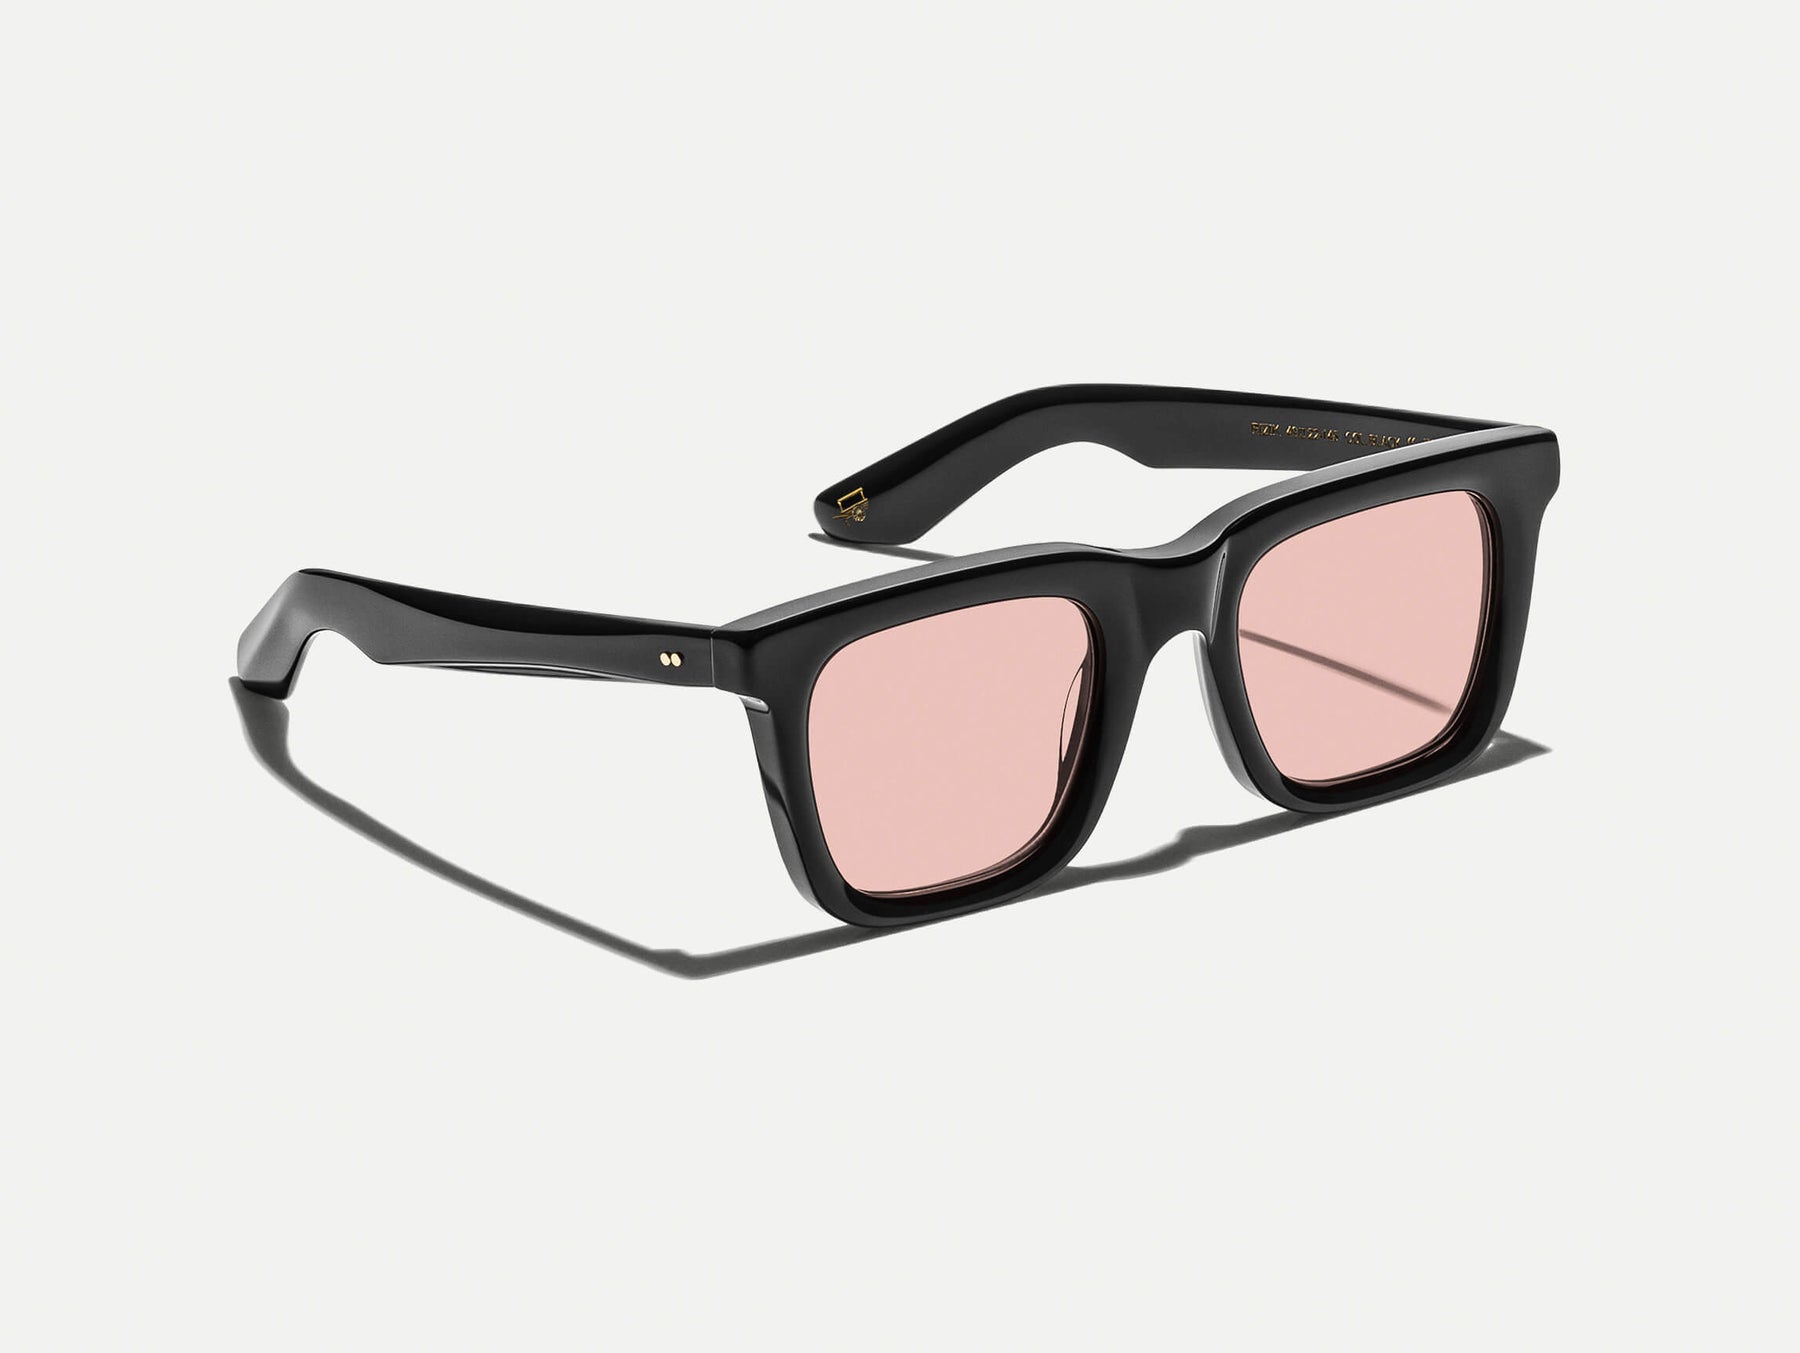 The RIZIK Black with New York Rose Tinted Lenses